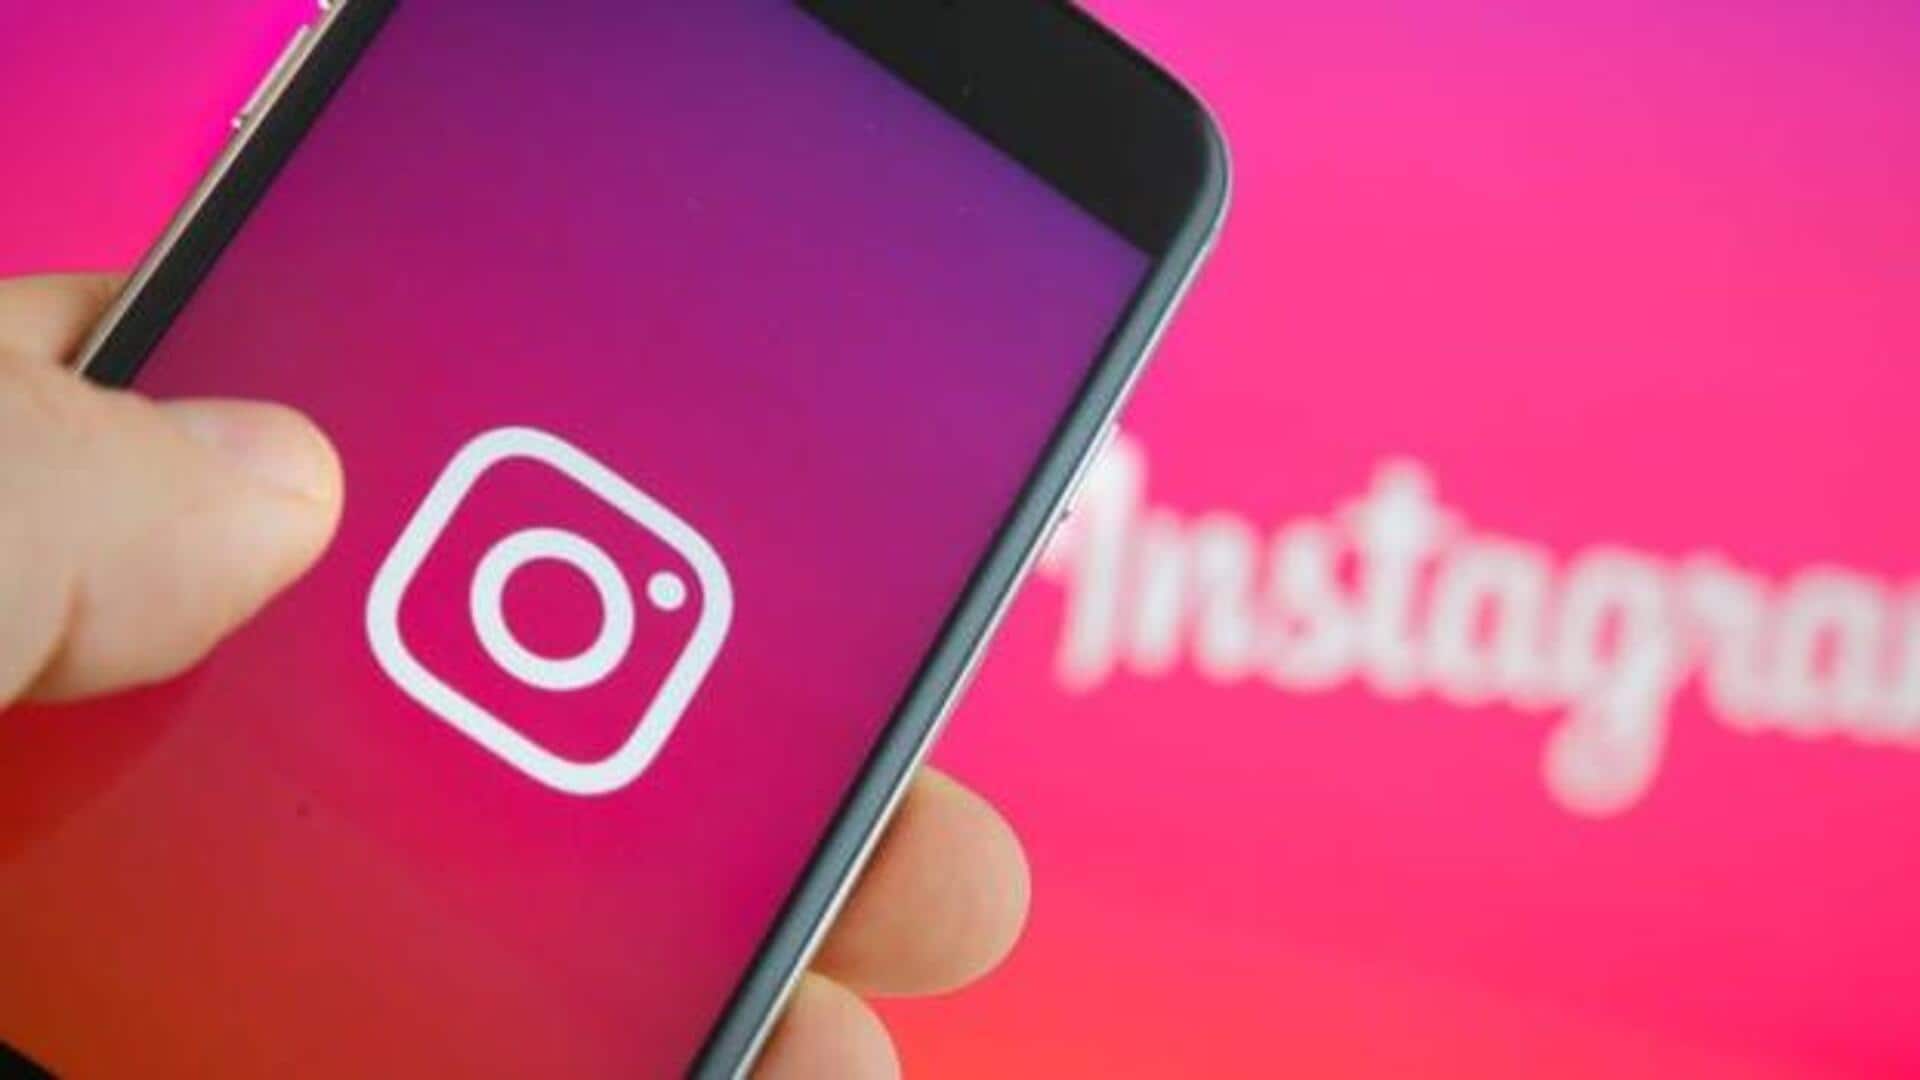 Instagram creators can now build AI versions of themselves